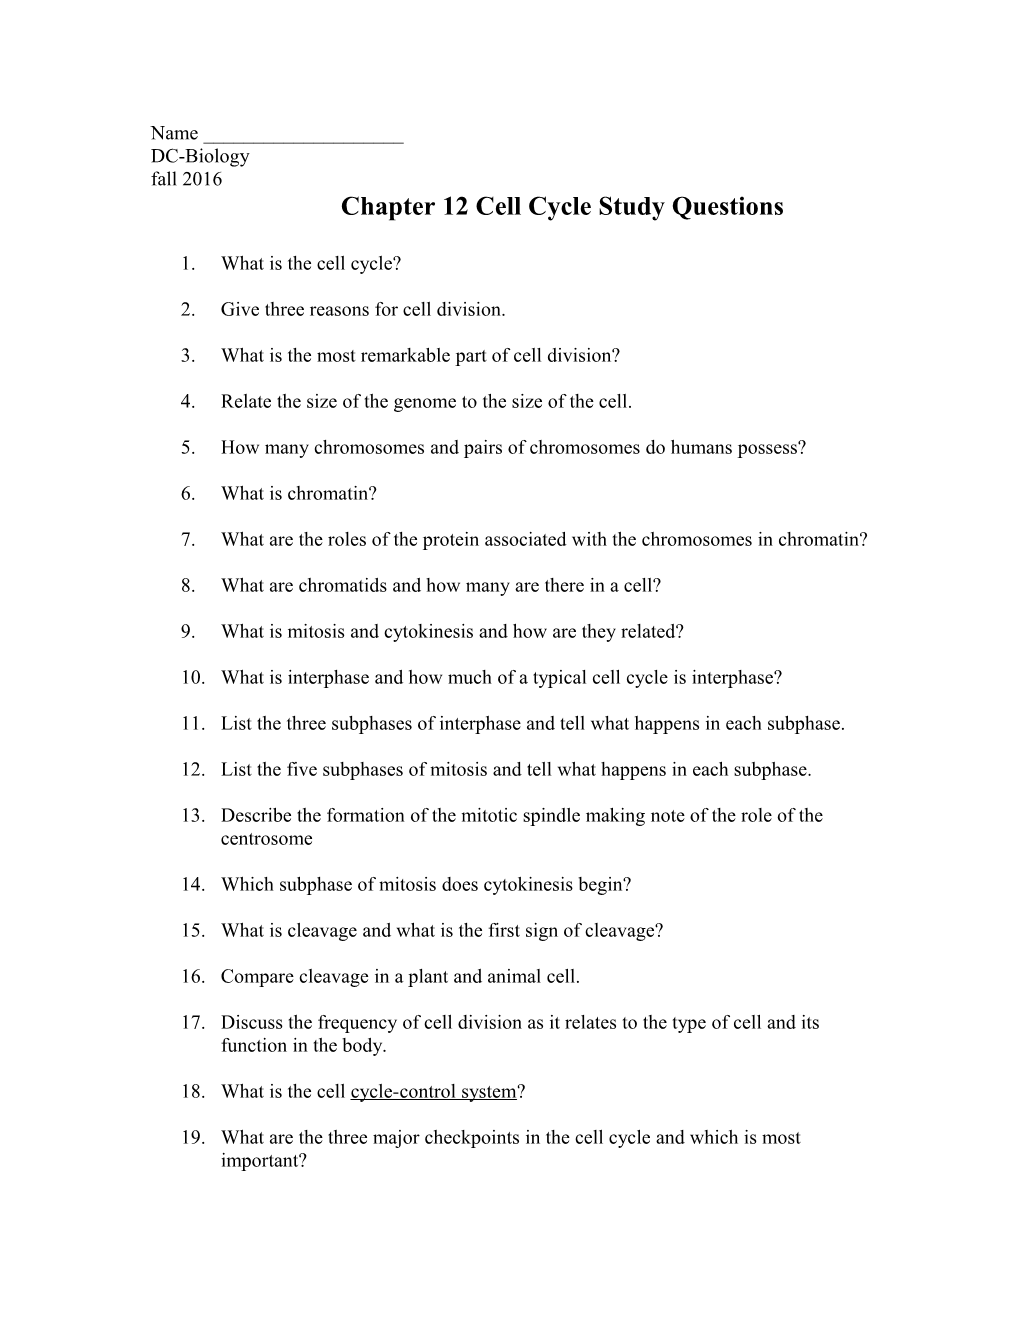 Chapter 12 Cell Cycle Study Questions